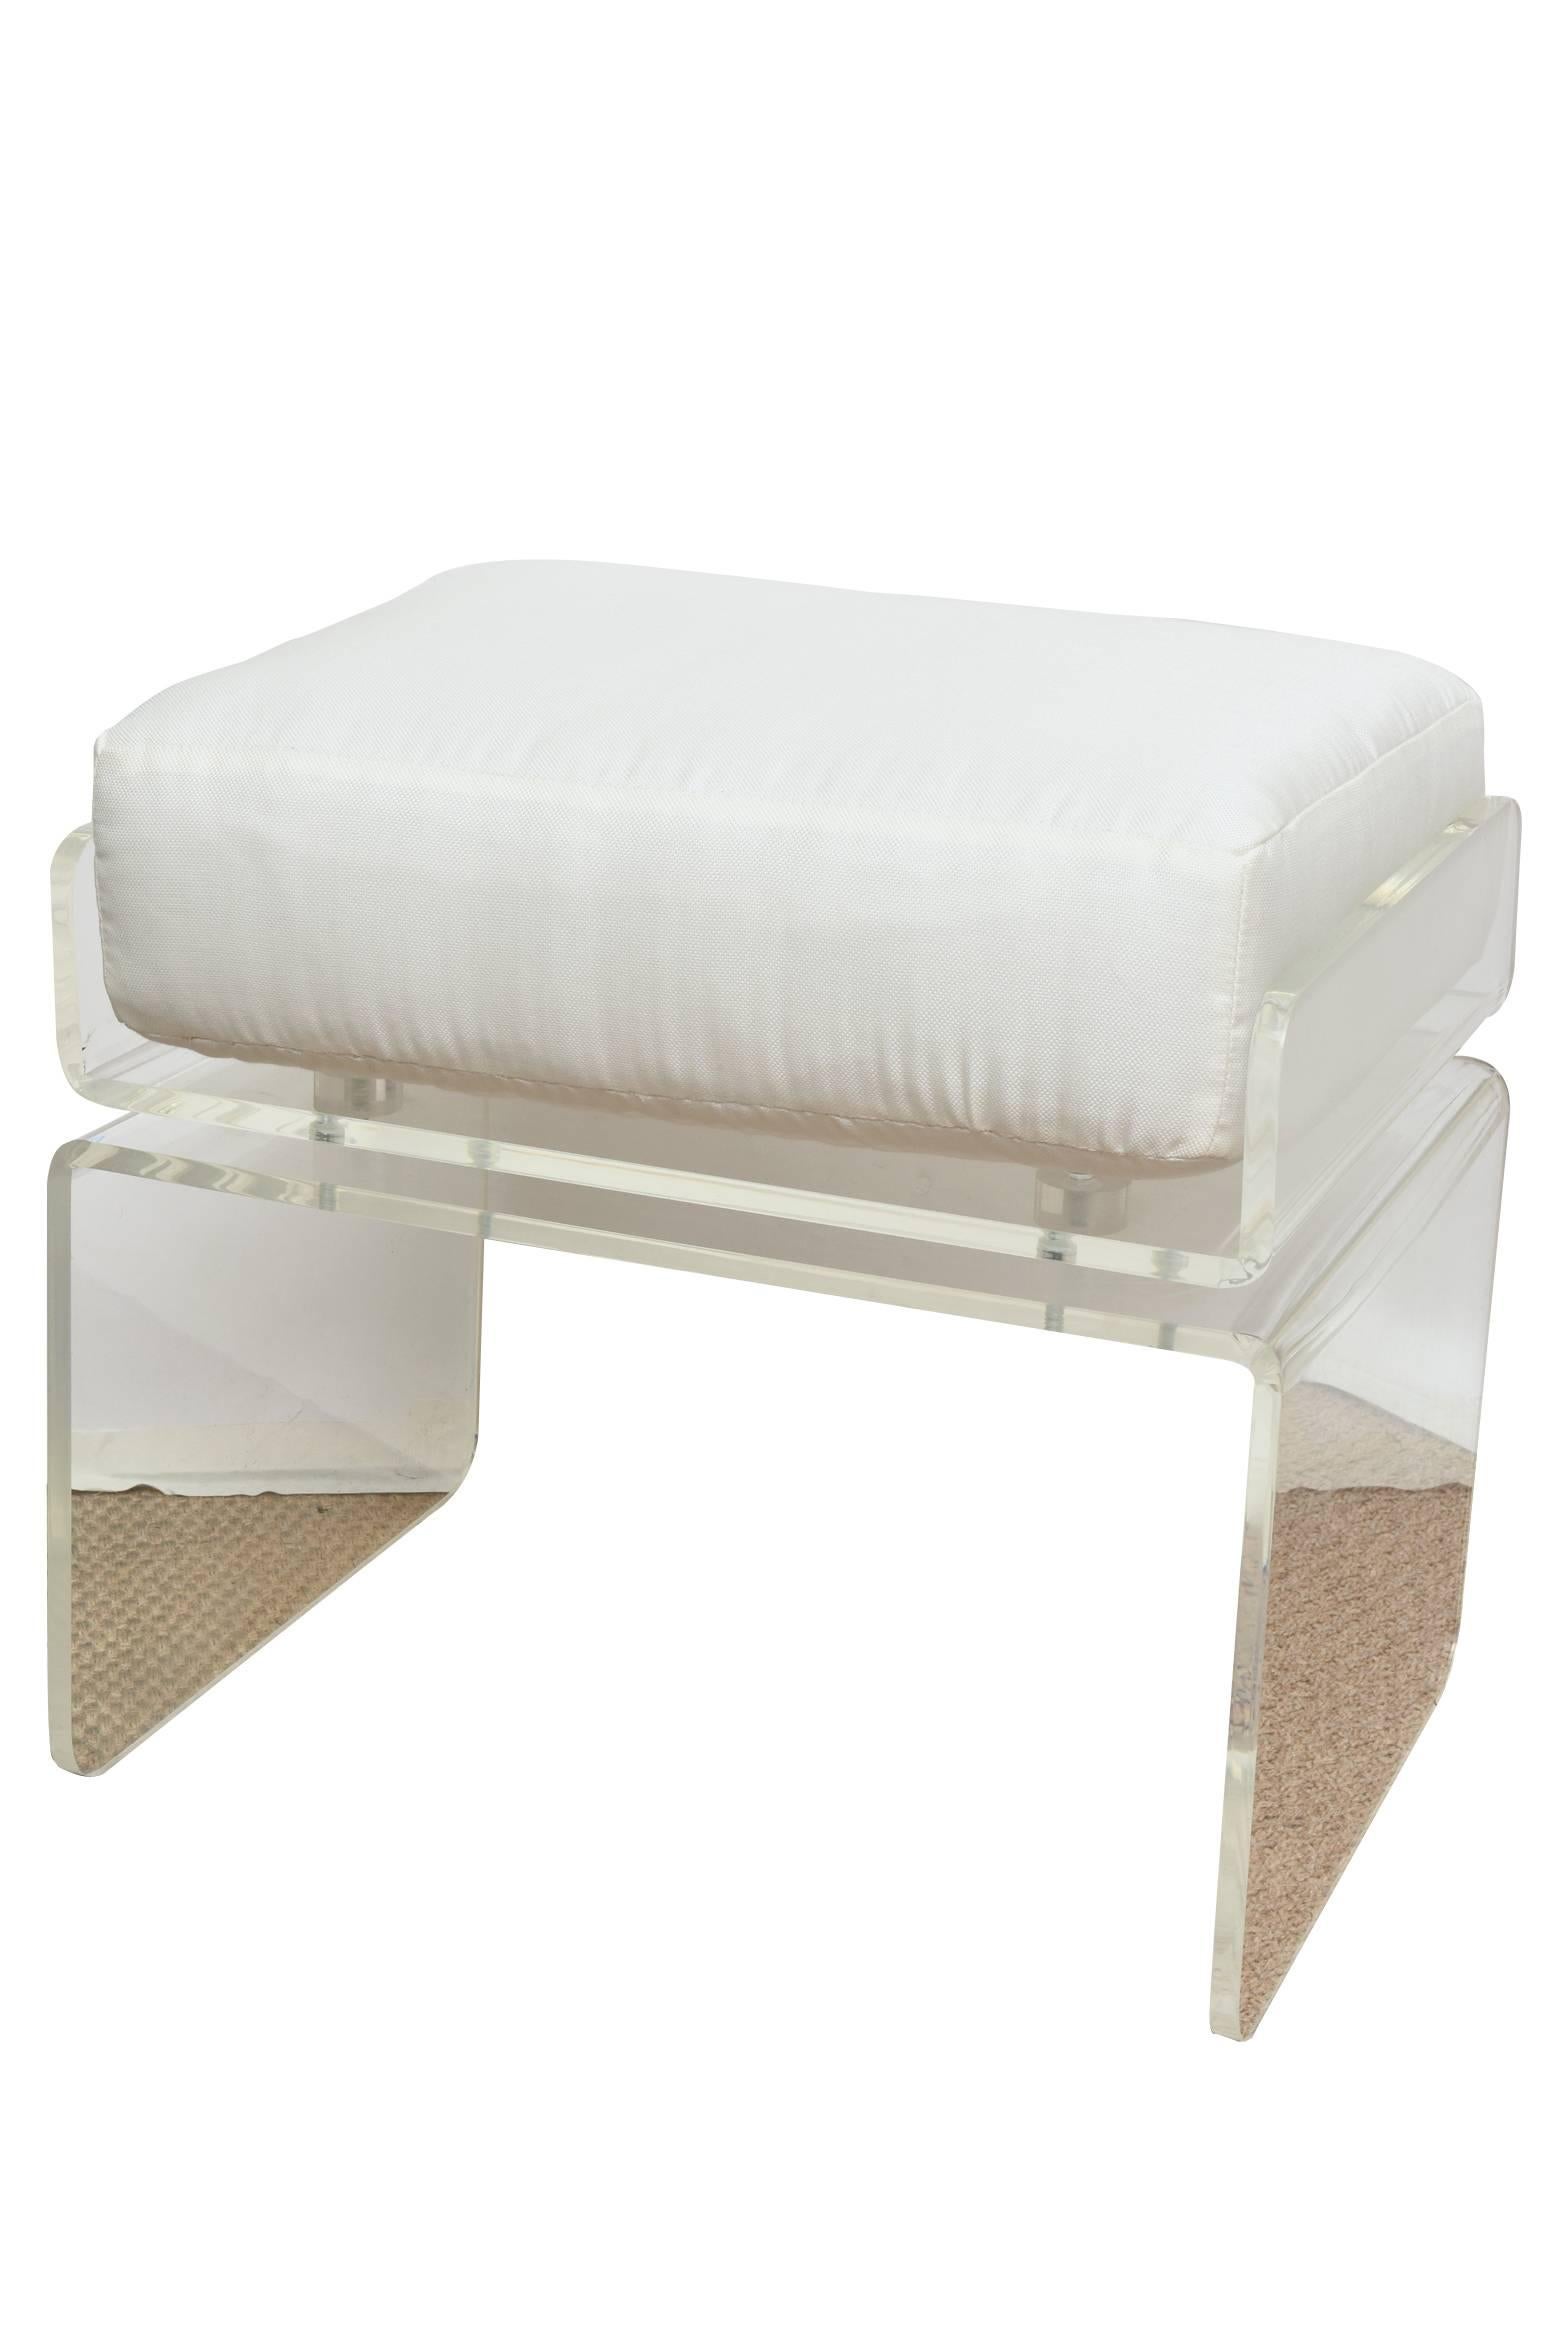 Late 20th Century Signed Italian Lucite Vintage Console with Two Pull-Out Benches /HOLIDAY SALE